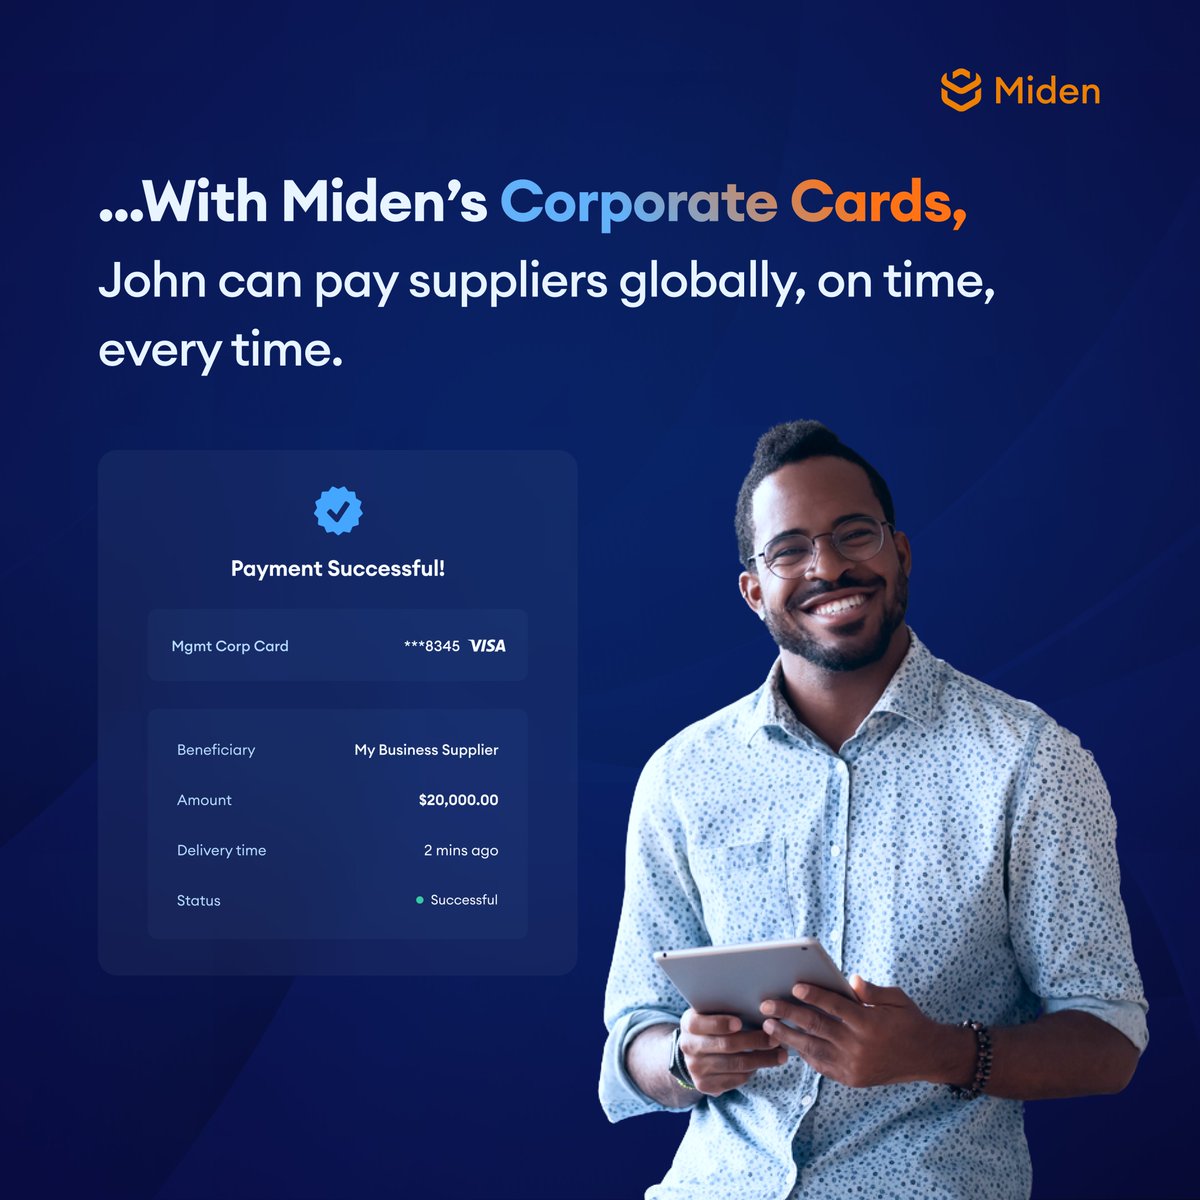 With Miden, you can pay suppliers globally, on time, every time.

#Miden #b2bpayments